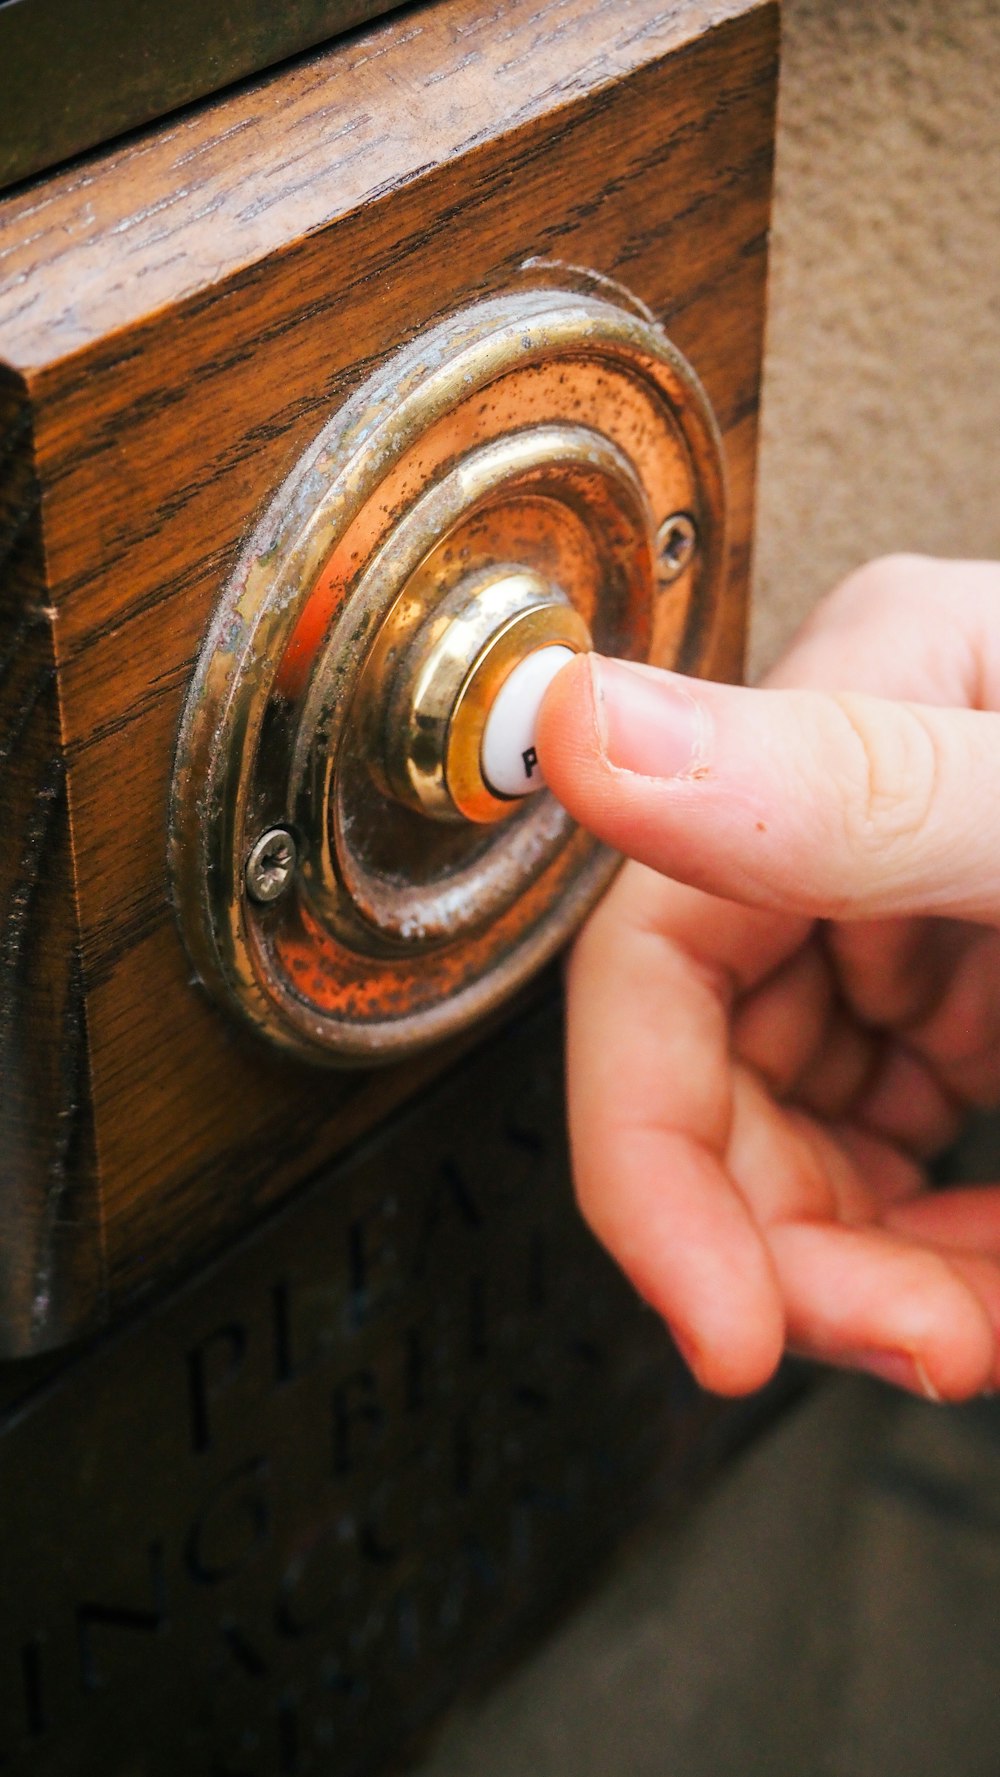 a person pressing a button on a wooden door